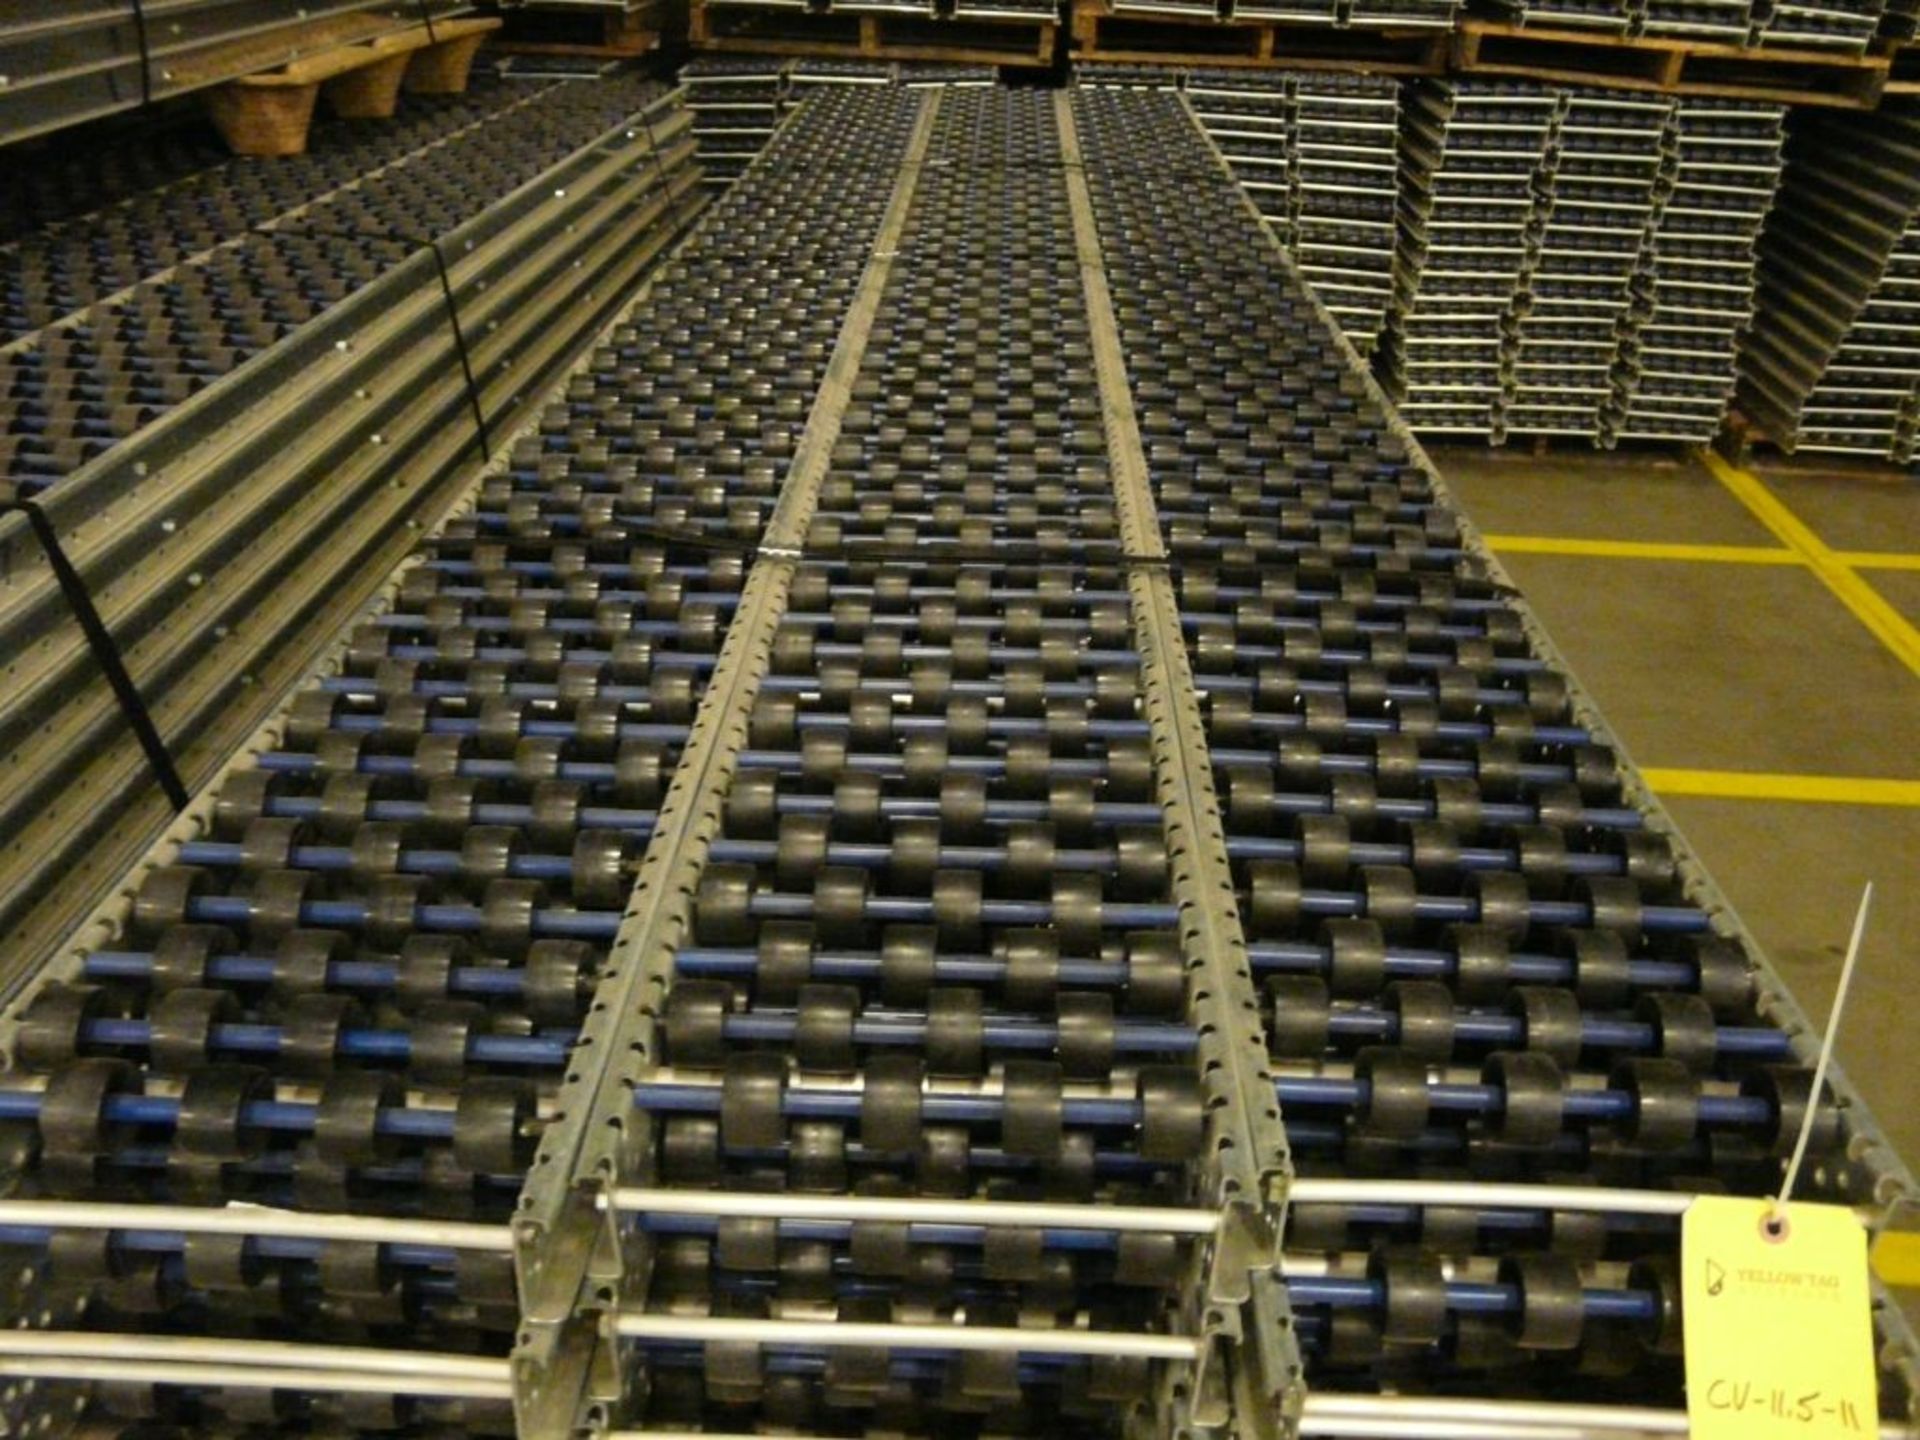 Lot of (90) SpanTrack Wheelbed Carton Flow Conveyors - 11.5'L x 11"W; Tag: 224223 - $30 Lot - Image 3 of 4